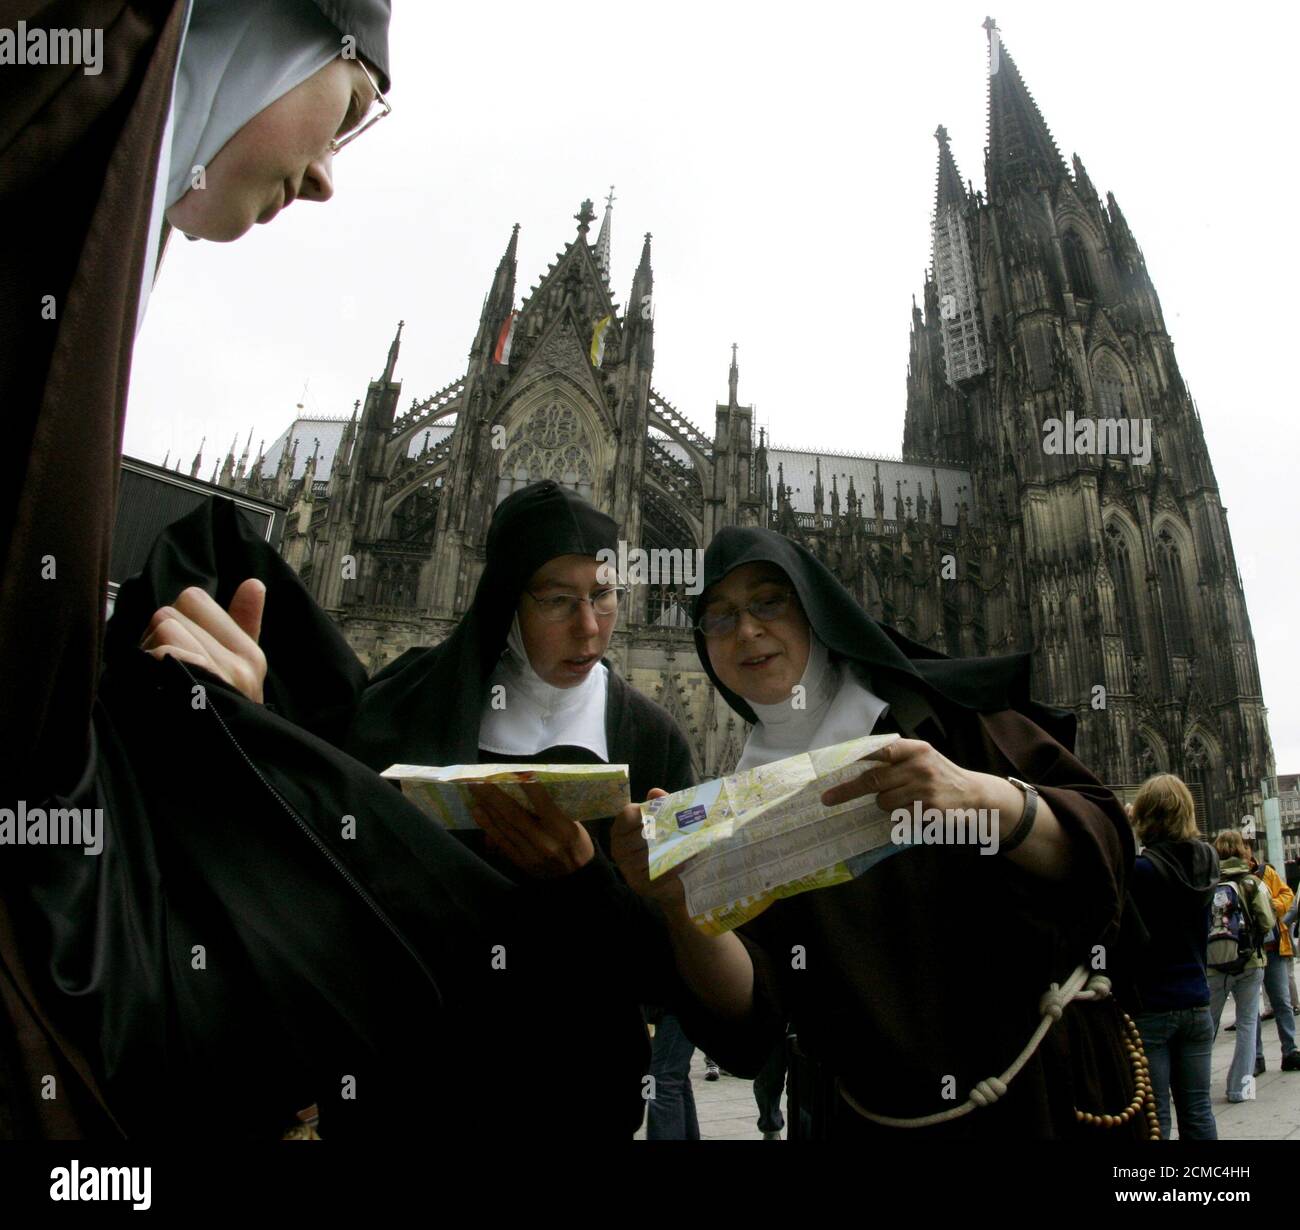 Four nuns from Muenster in Westphalia look at their city maps after arriving for the World Youth Day in Cologne.  Four nuns from Muenster in Westphalia look at their city maps after arriving for the World Youth Day in Cologne August 15, 2005. The World Youth Day takes place in the western German city from August 16 until August 21, 2005. In the background is the Cologne Cathedral. REUTERS/Arnd Wiegmann Stock Photo